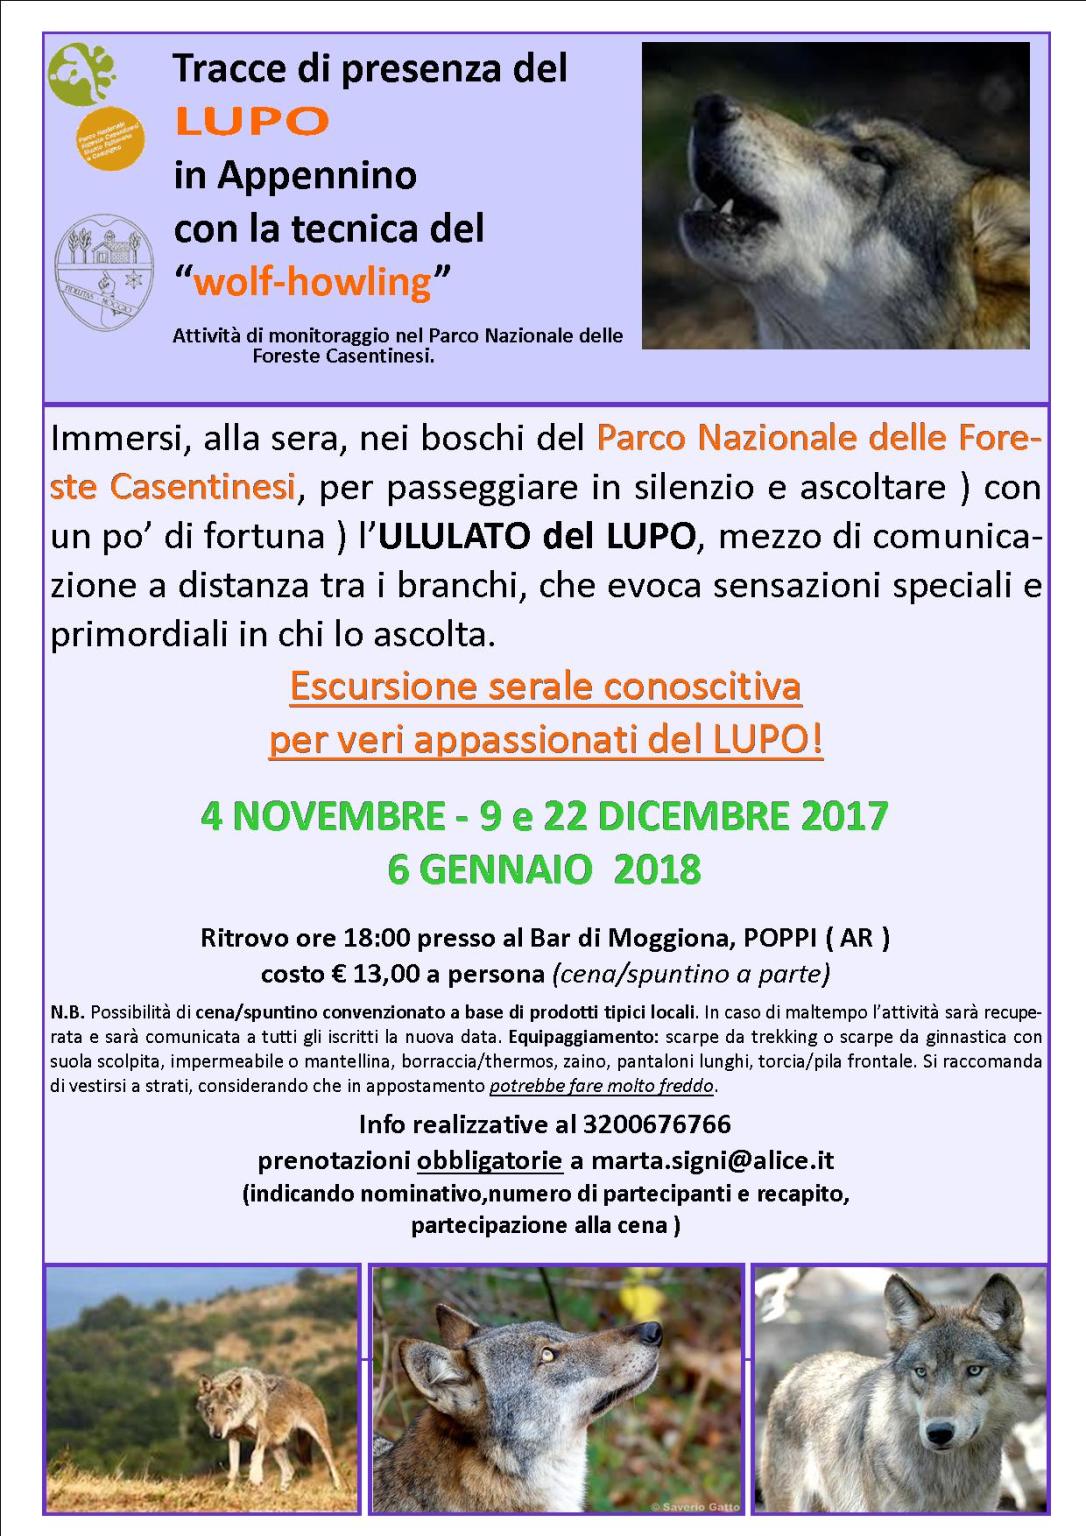 lupo escursioni wolf howling 2017